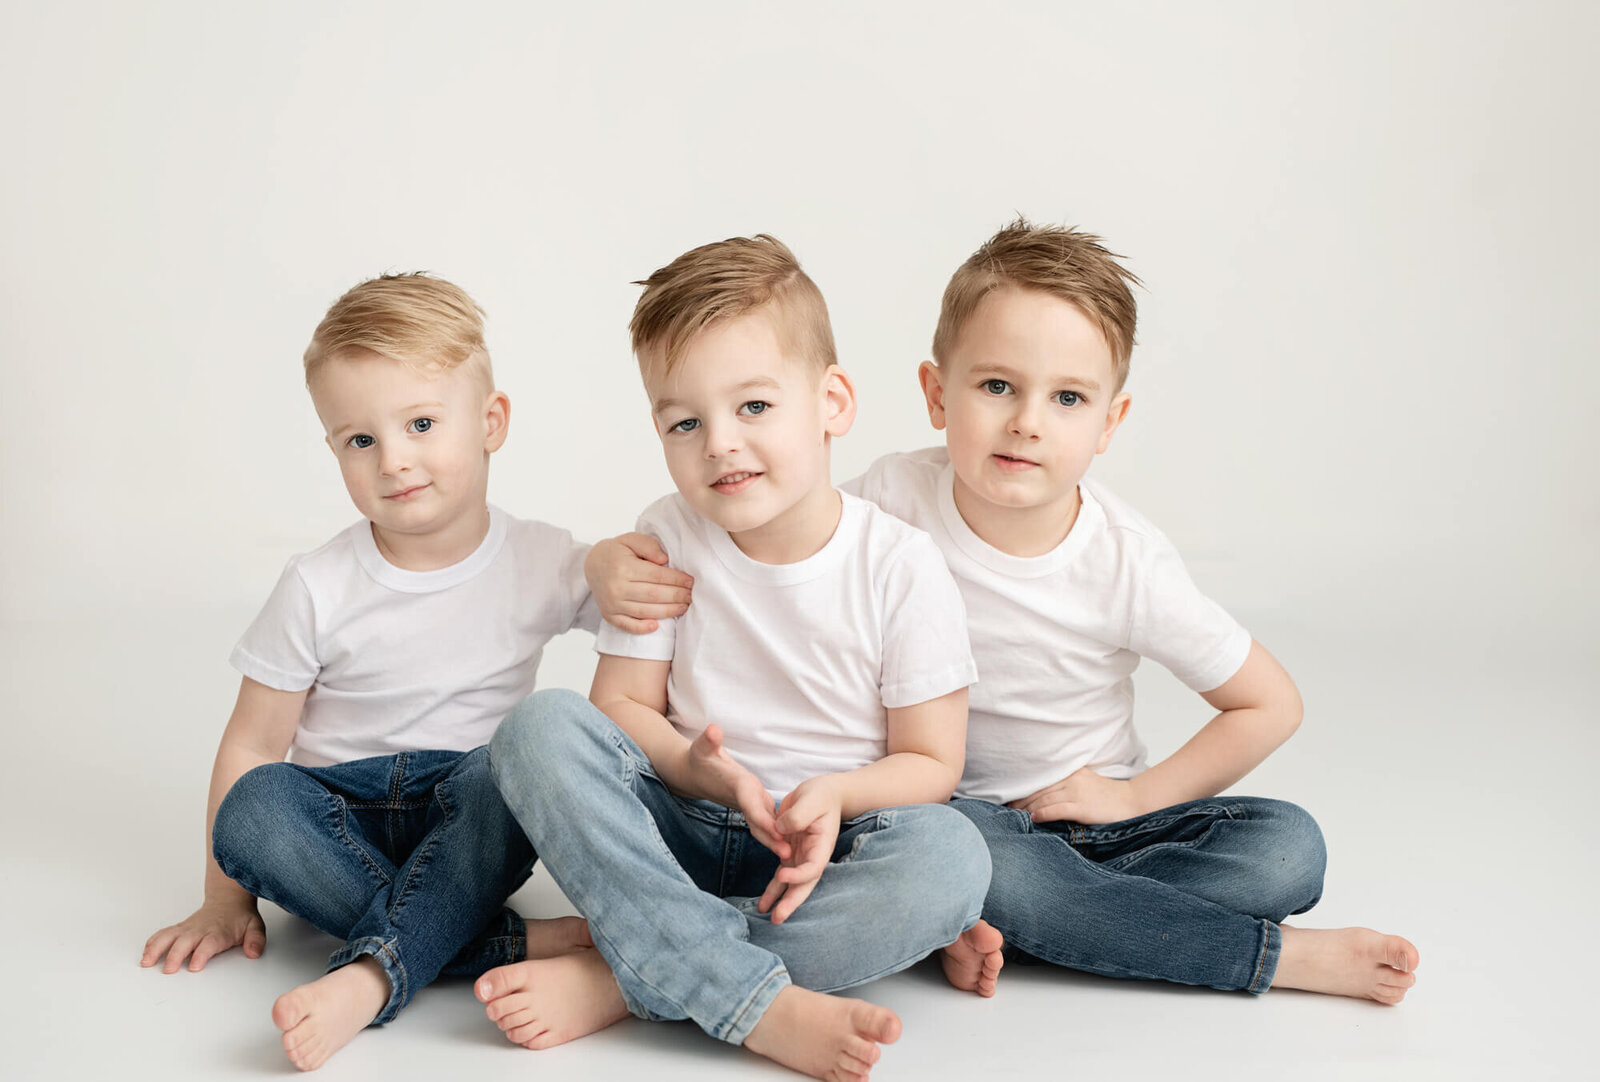 Sibling boys with blue jeans and white shirts and white background